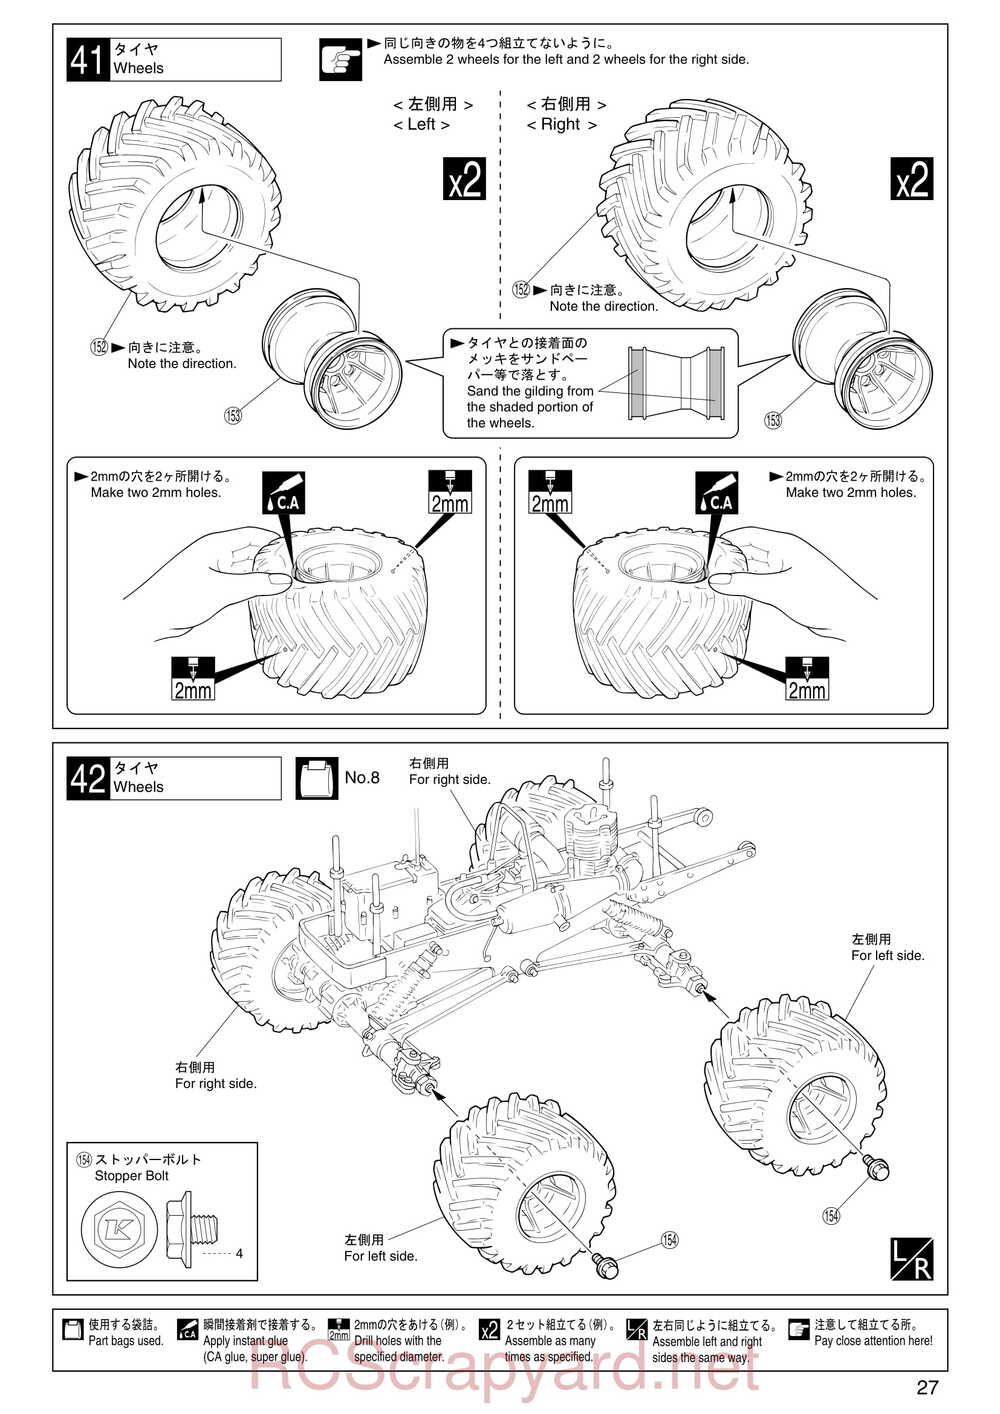 Kyosho - 31224 - Mad-Armour - Manual - Page 27